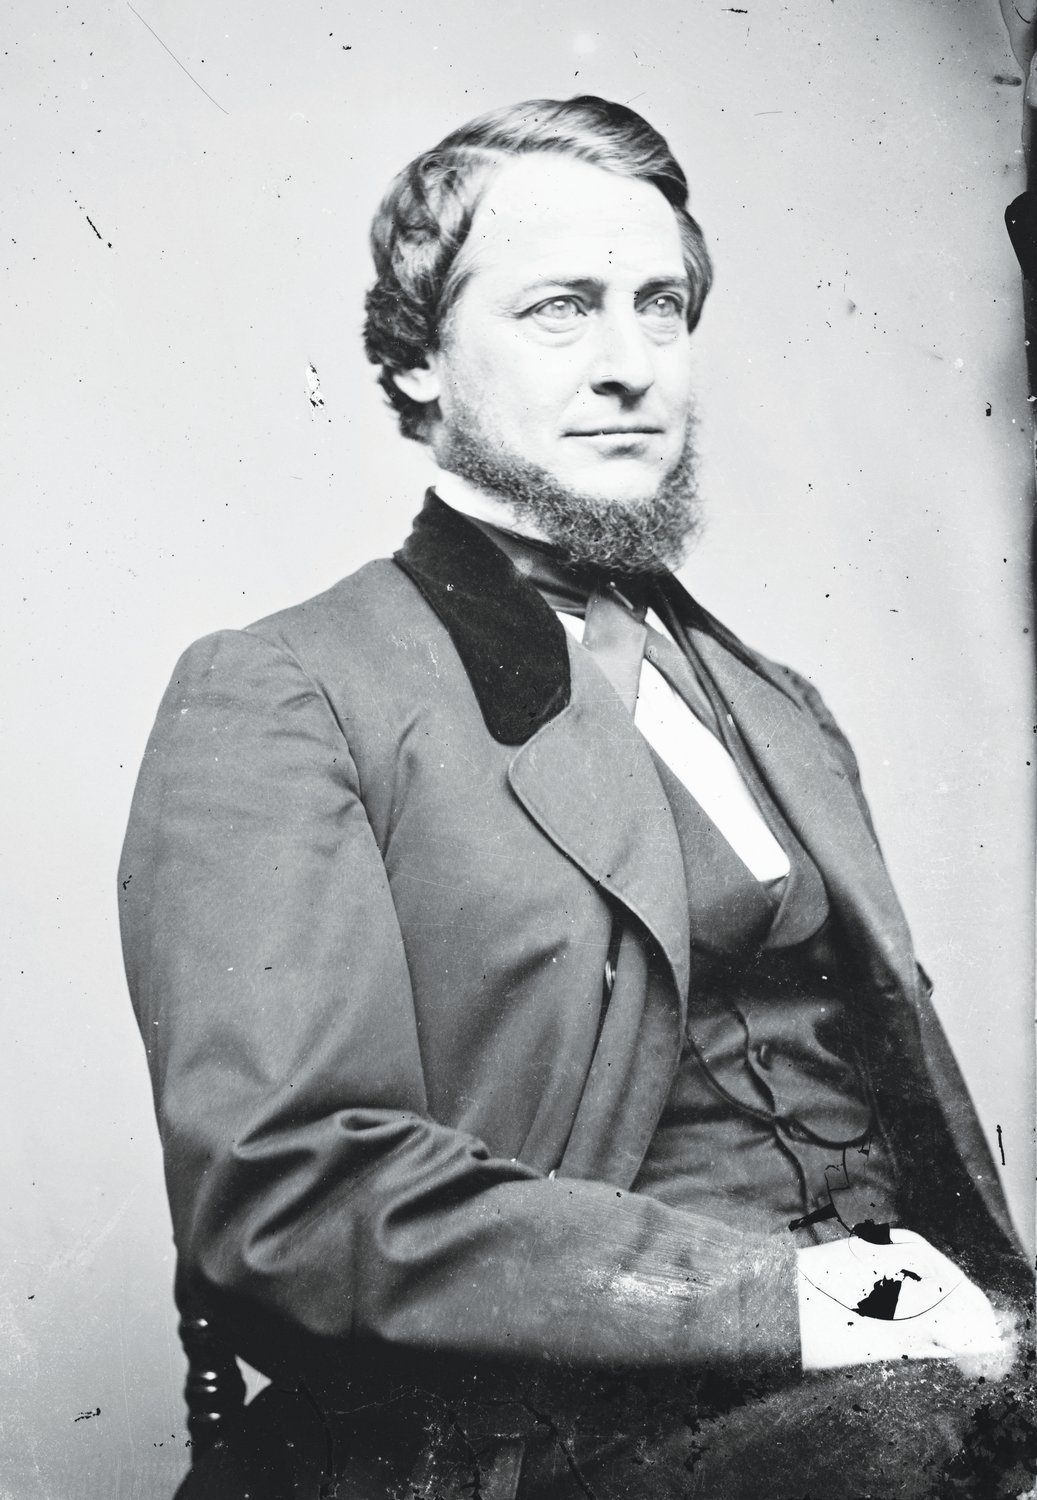 Clement Vallandigham was the leader of the Copperhead faction during the Civil War using his political ties to further the faction’s agenda.